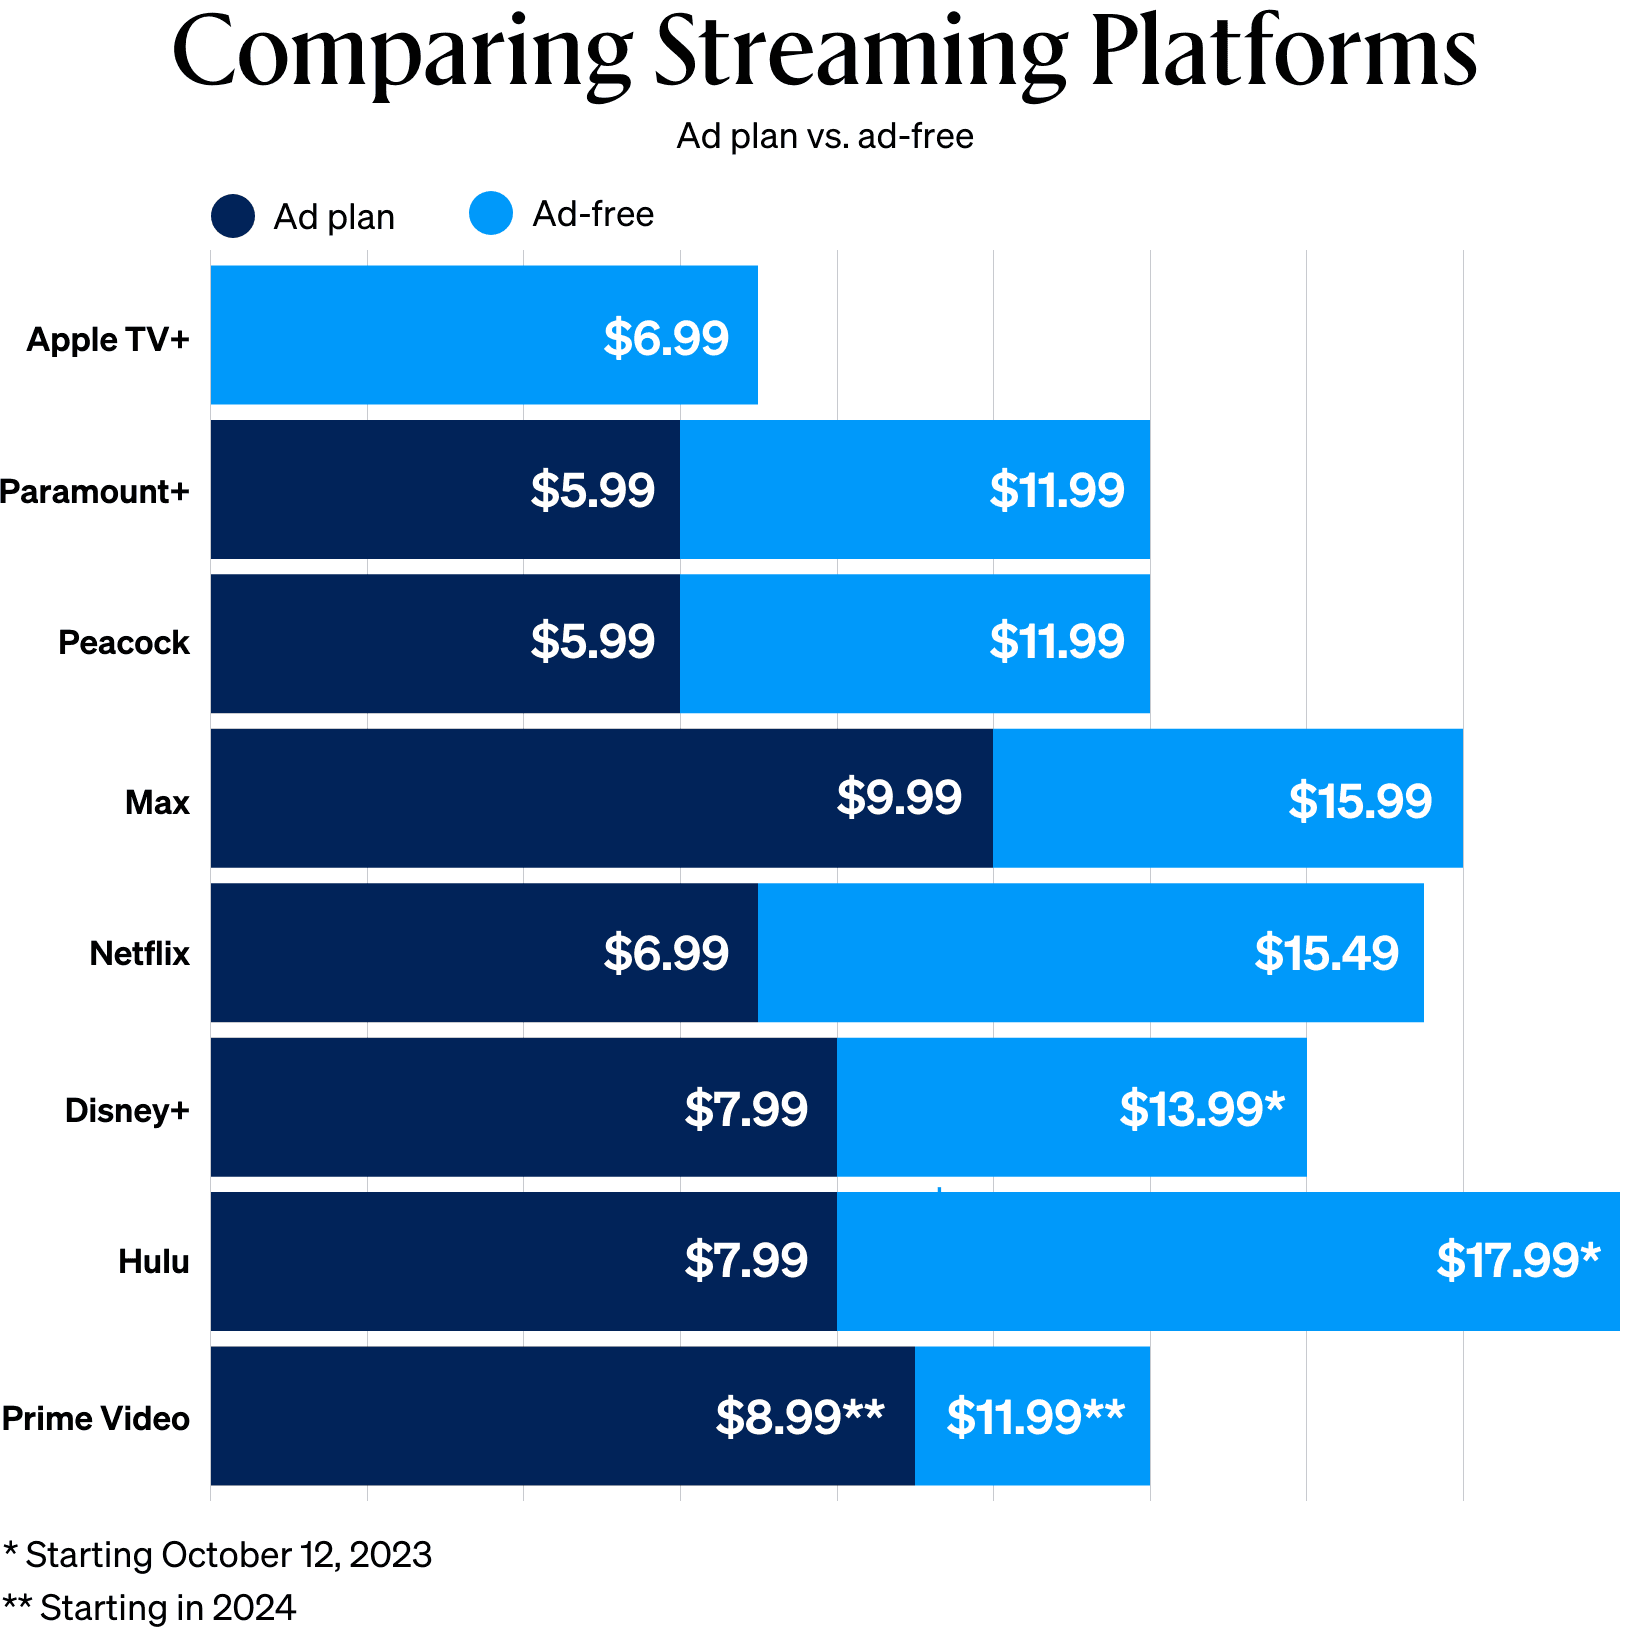 Bar chart comparing the cost of streaming platforms ad plans versus their ad-free plans. Includes pricing for Apple TV+, Paramount+, Peacock, Max, Netflix, Disney+, Hulu, and Prime Video.